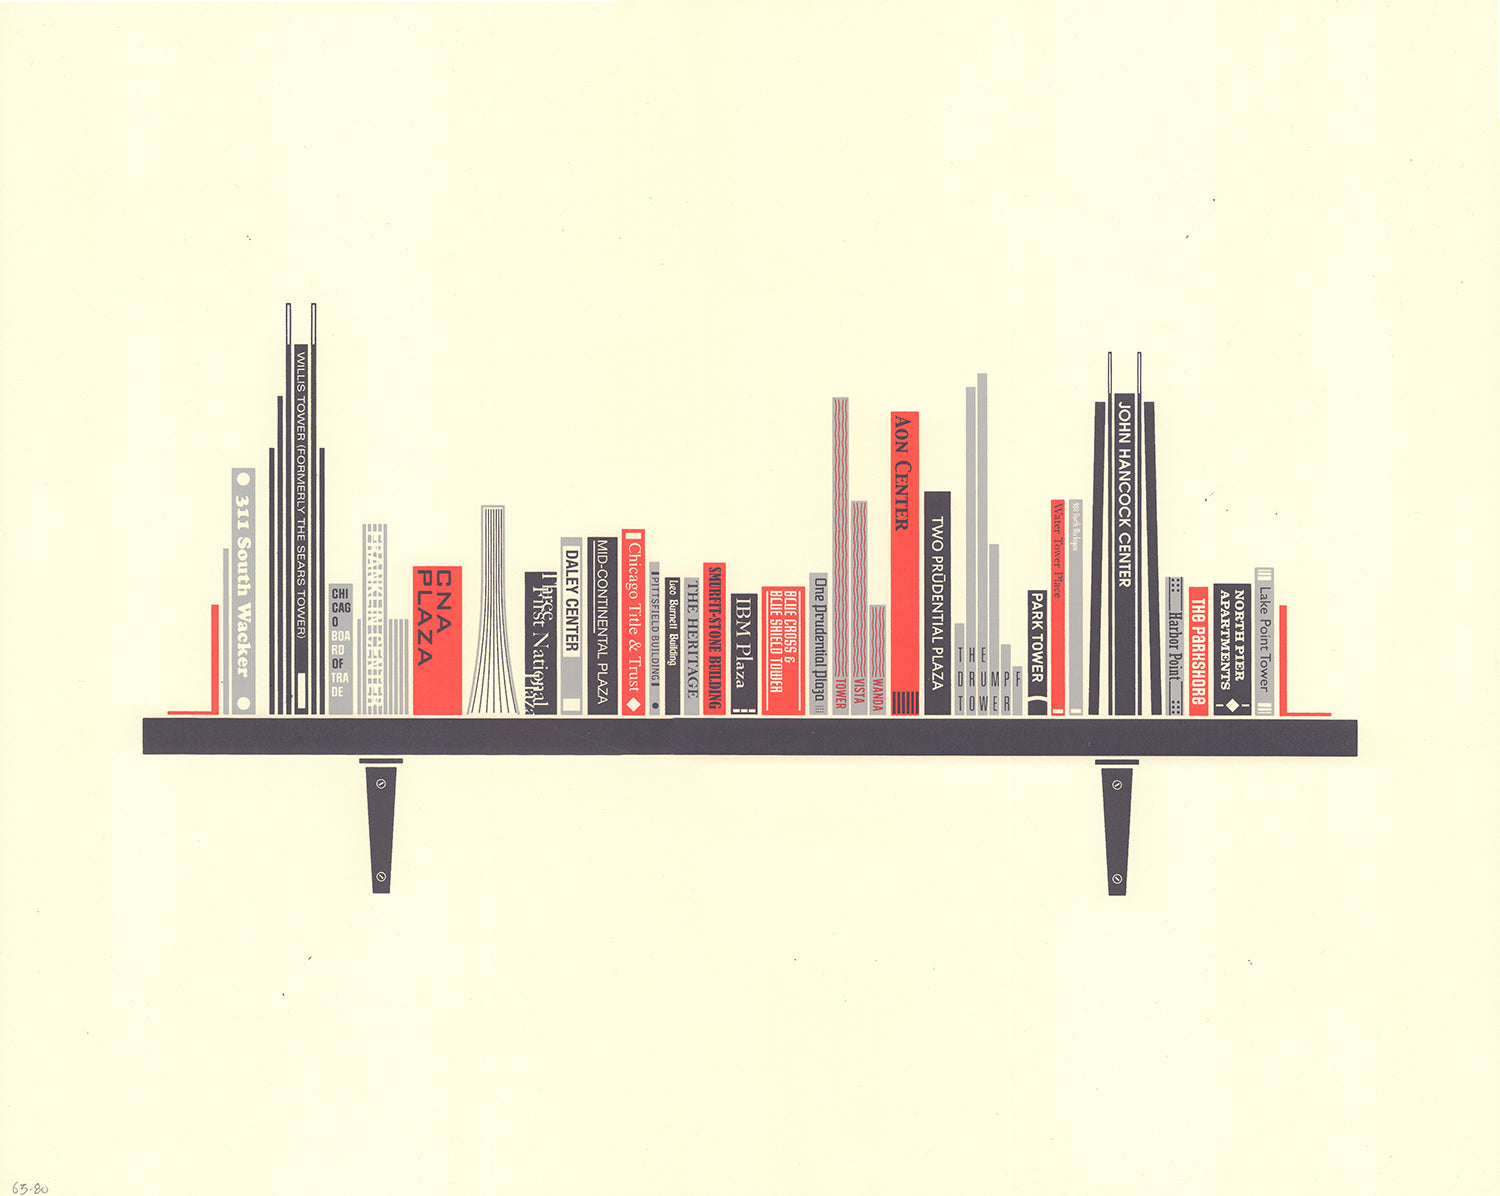 "Bookshelf Chicago Print 2019 Updated Edition" by Sean Mort